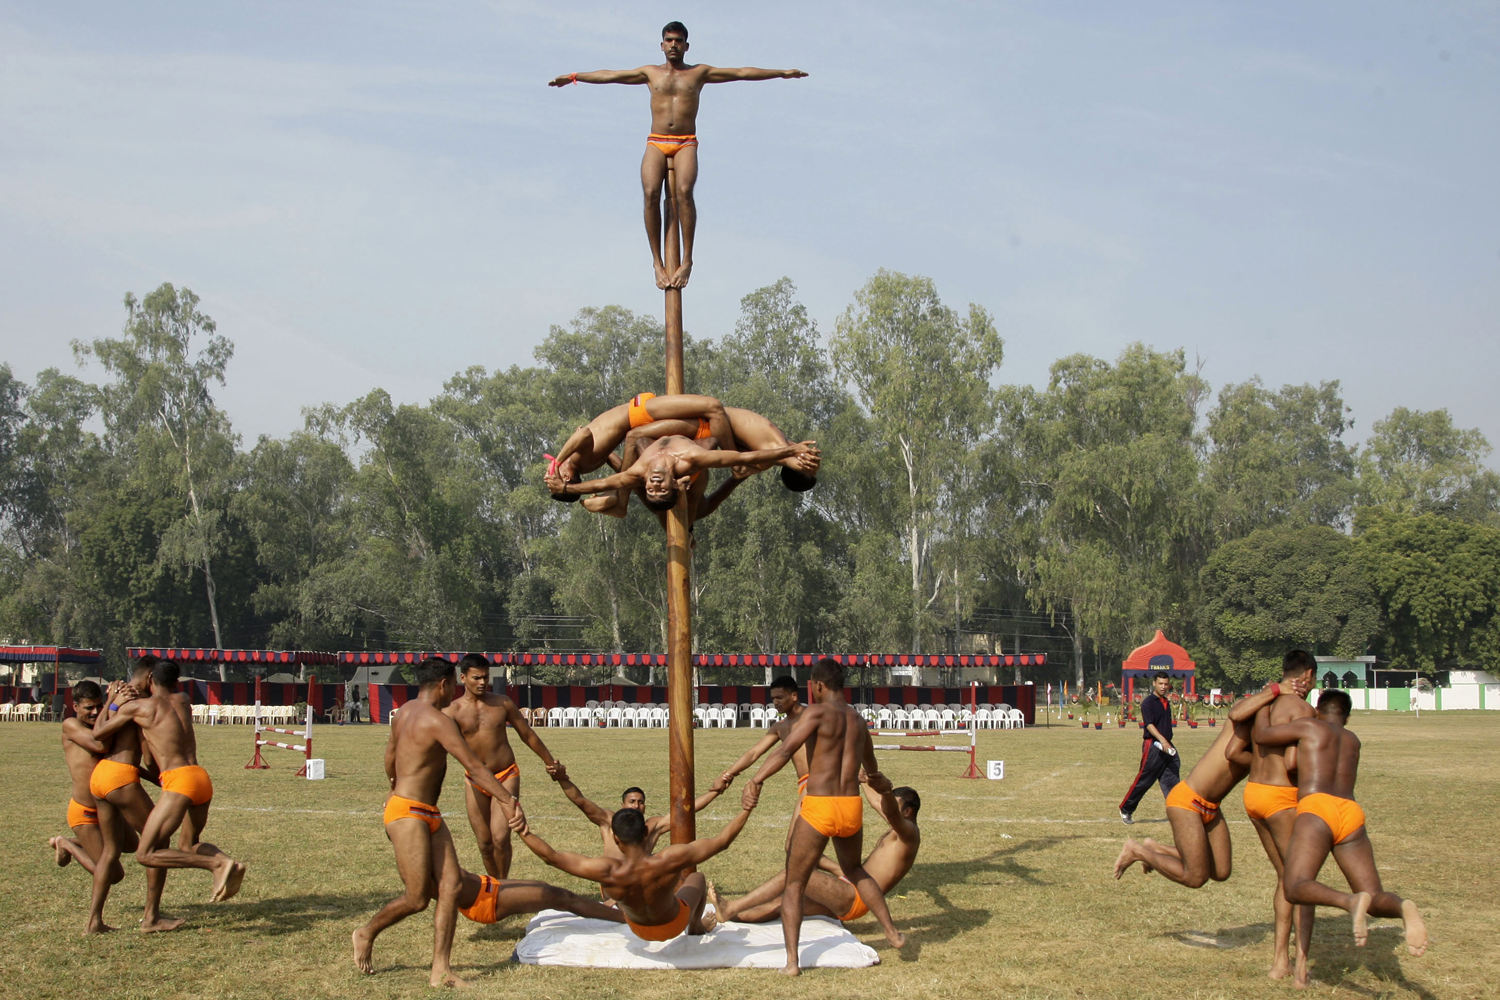 Image: Oct. 21, 2012. Indian soldiers perform Malkhamb, a traditional Indian sport in which a gymnast performs on a wooden pole, during a two day Army exhibition in Allahabad.